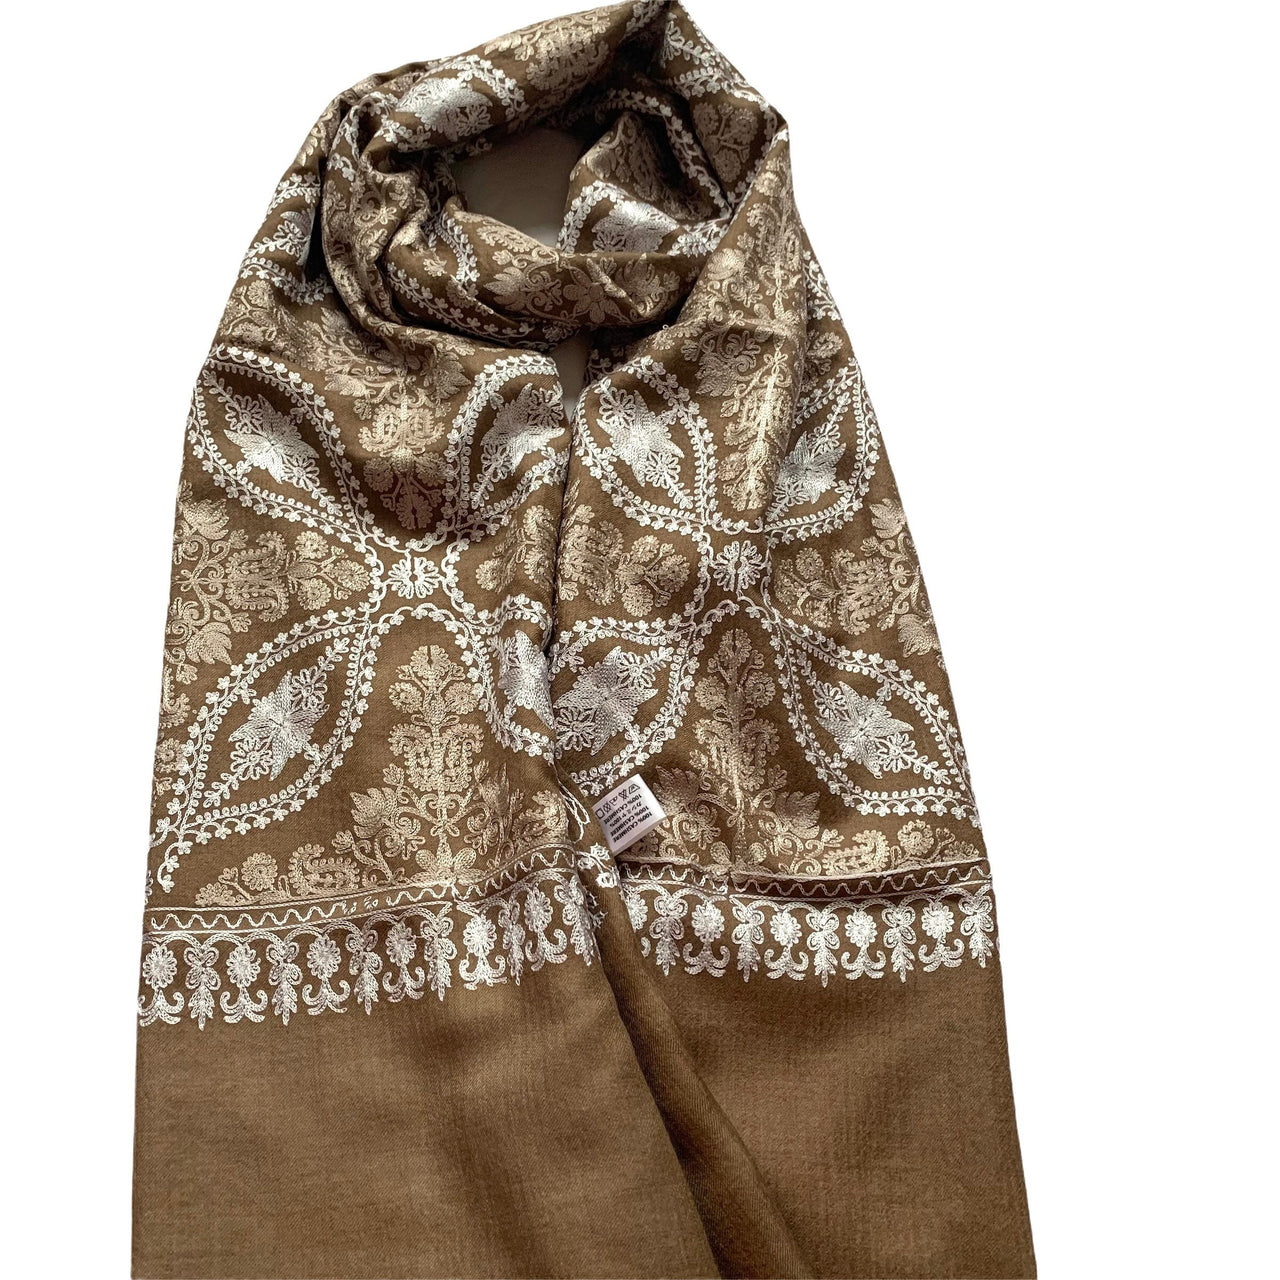 Gorgeous Brown Silk Embroidered Scarf/Shawl/Stole/Wrap